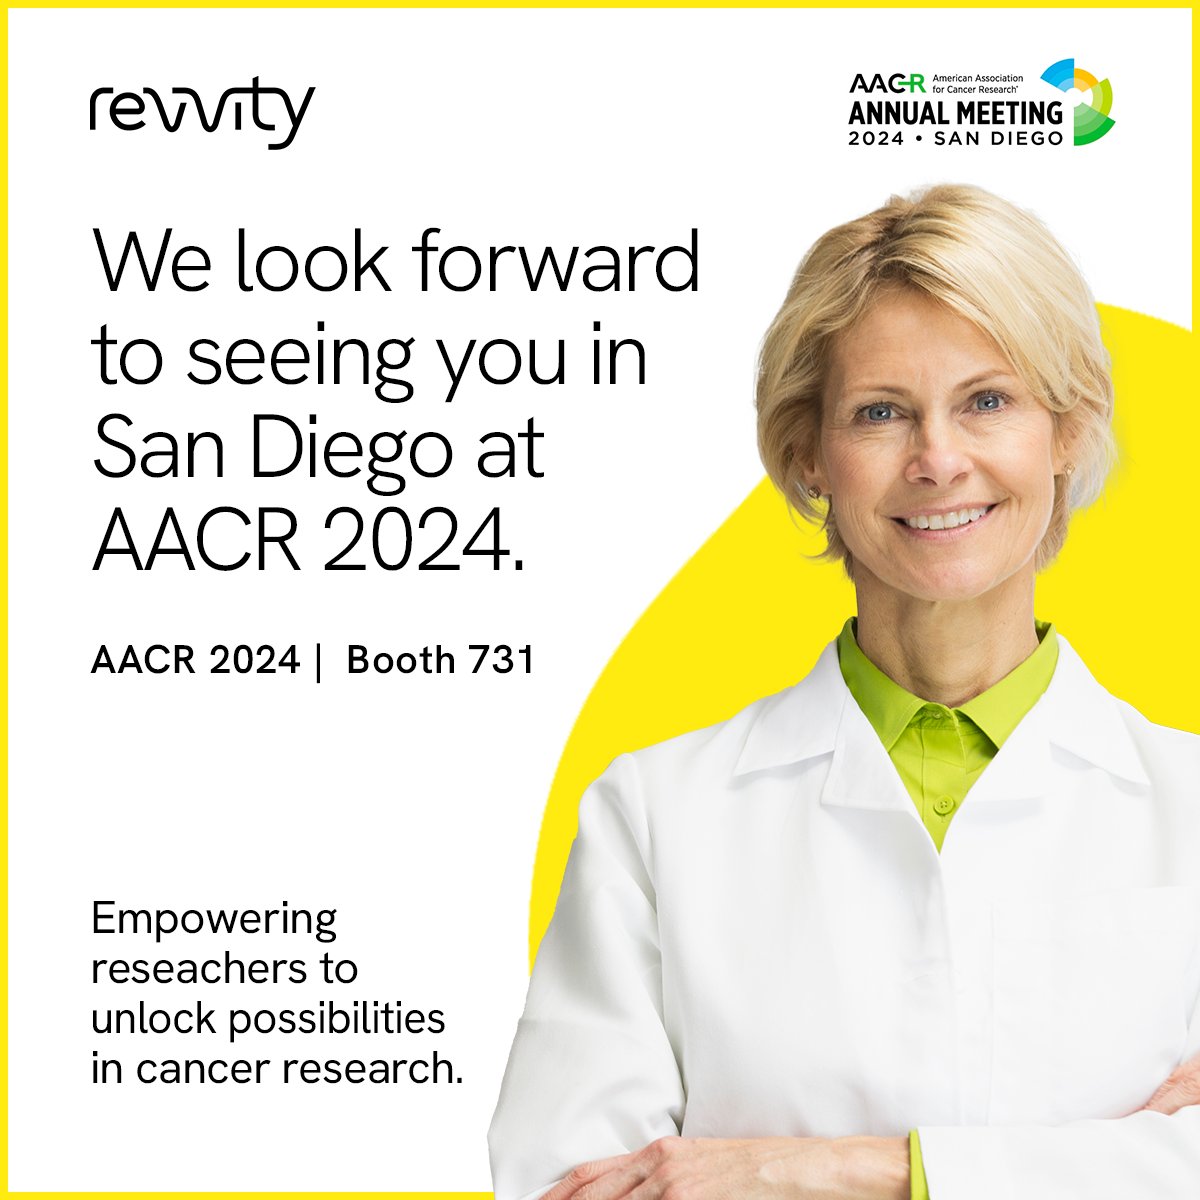 We're ready to show you our latest innovations at #AACR24. You can find us in booth 731. See you there! ms.spr.ly/6010c9f1e #Revvity #RevvupResearch